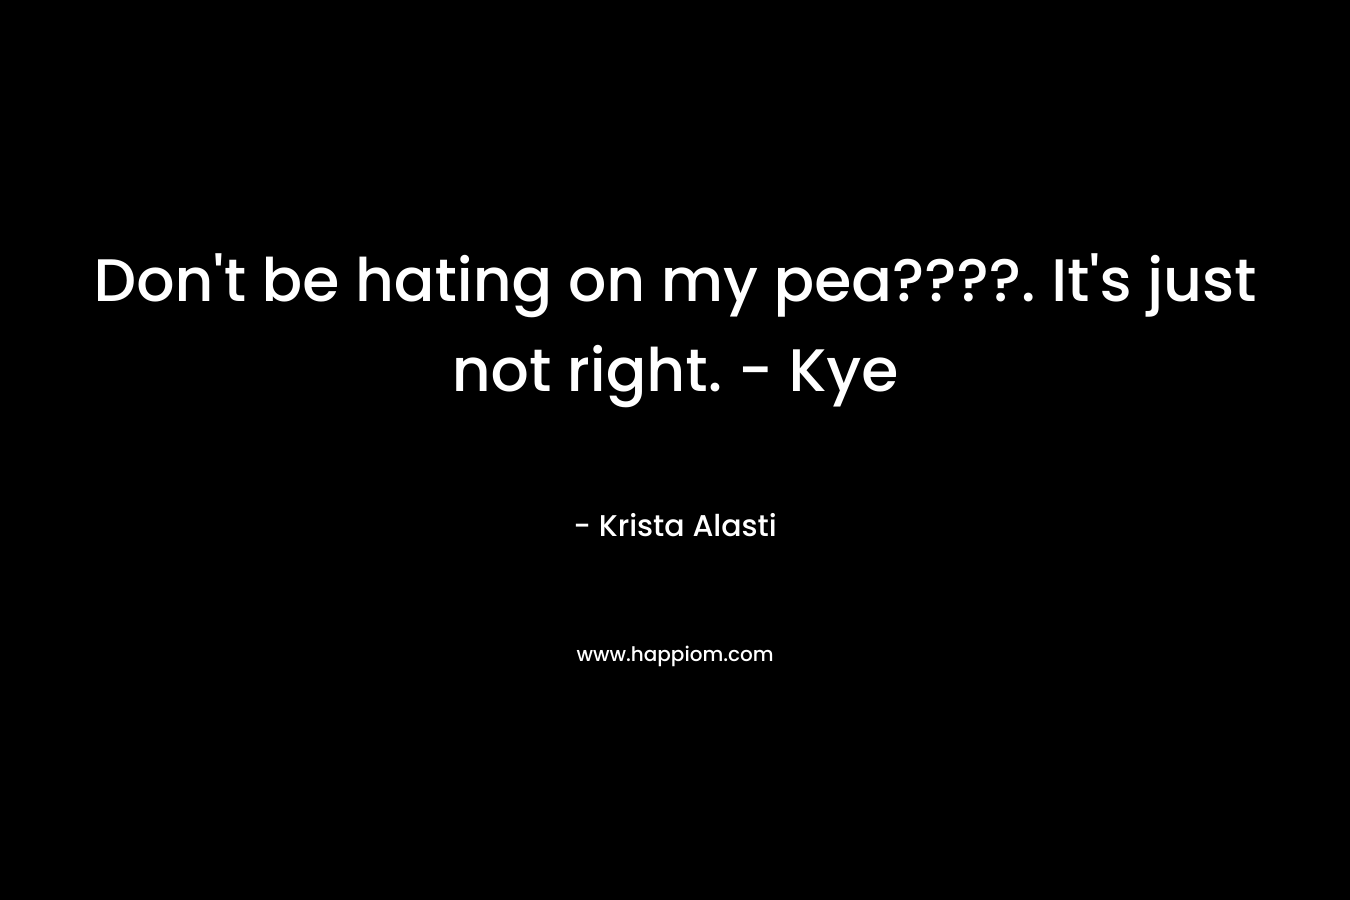 Don't be hating on my pea????. It's just not right. - Kye